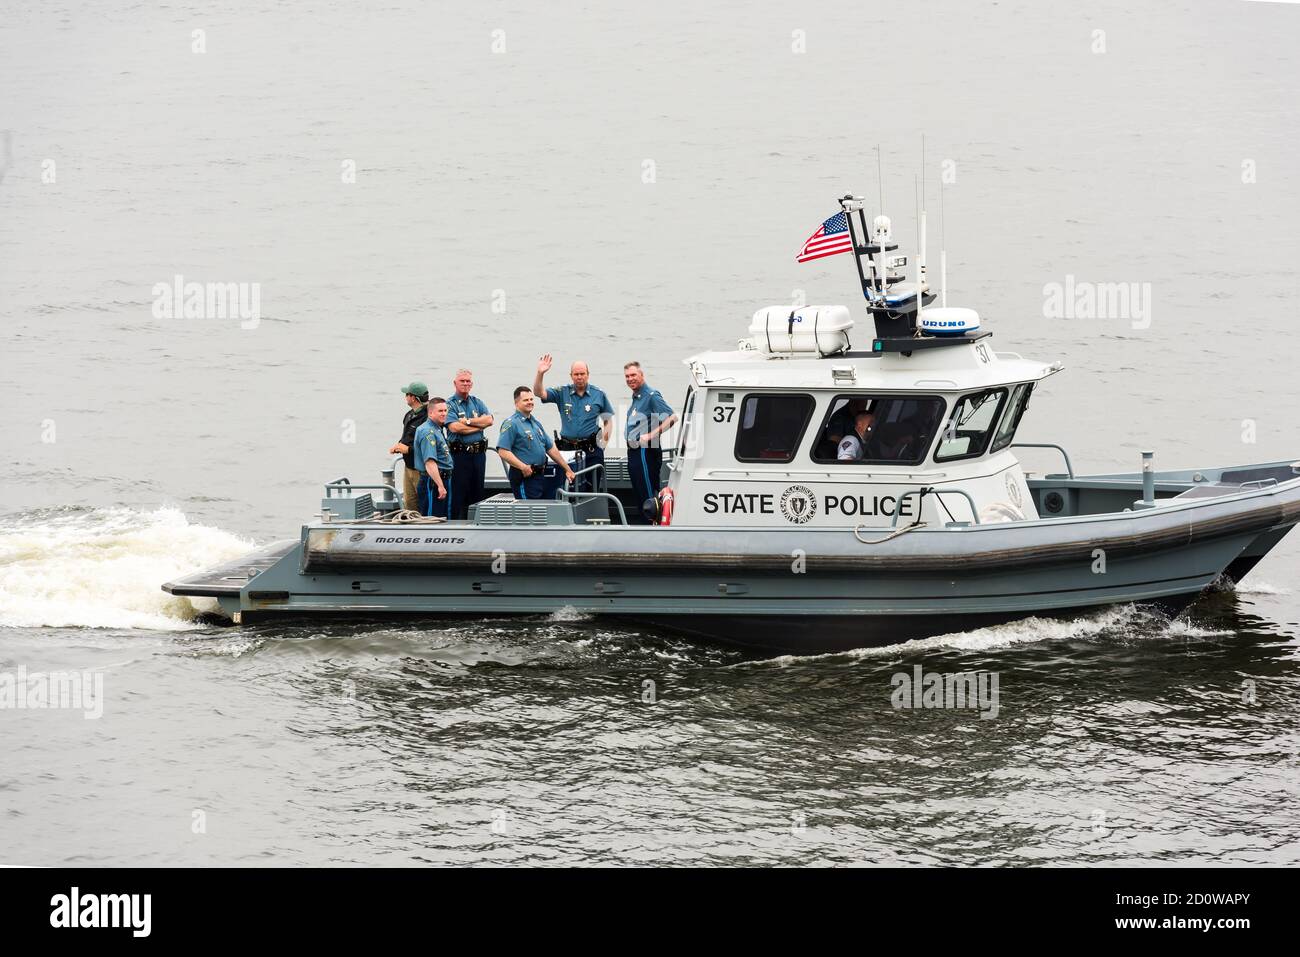 Boston, Massachusetts. 13th June, 2017. Mass State Police boat during Parade of Sail at Sail Boston. Photographed from the USS Whidbey Island. Stock Photo